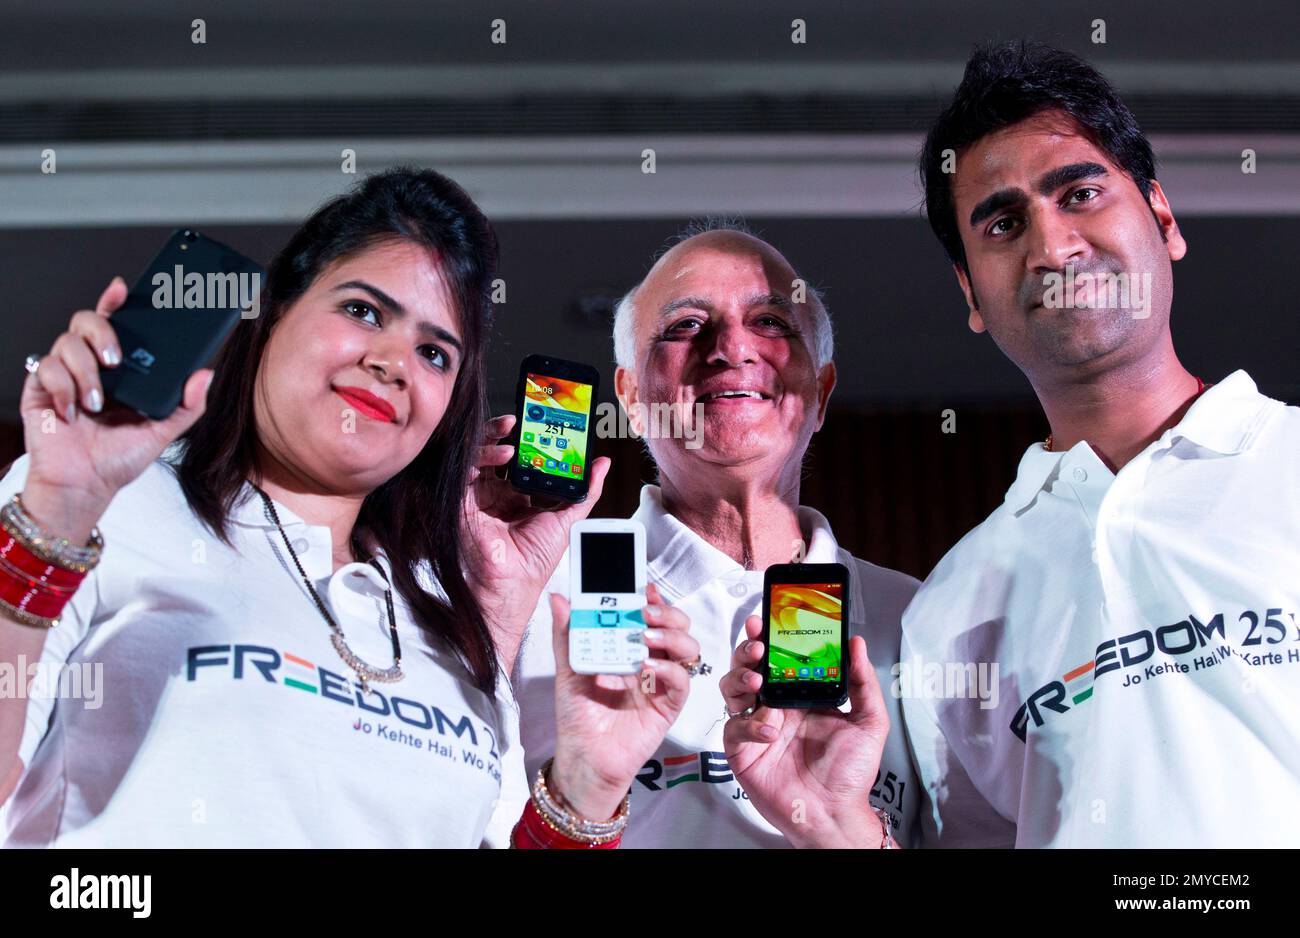 Facing Losses, Freedom 251-Maker Seeks Government Help - News18